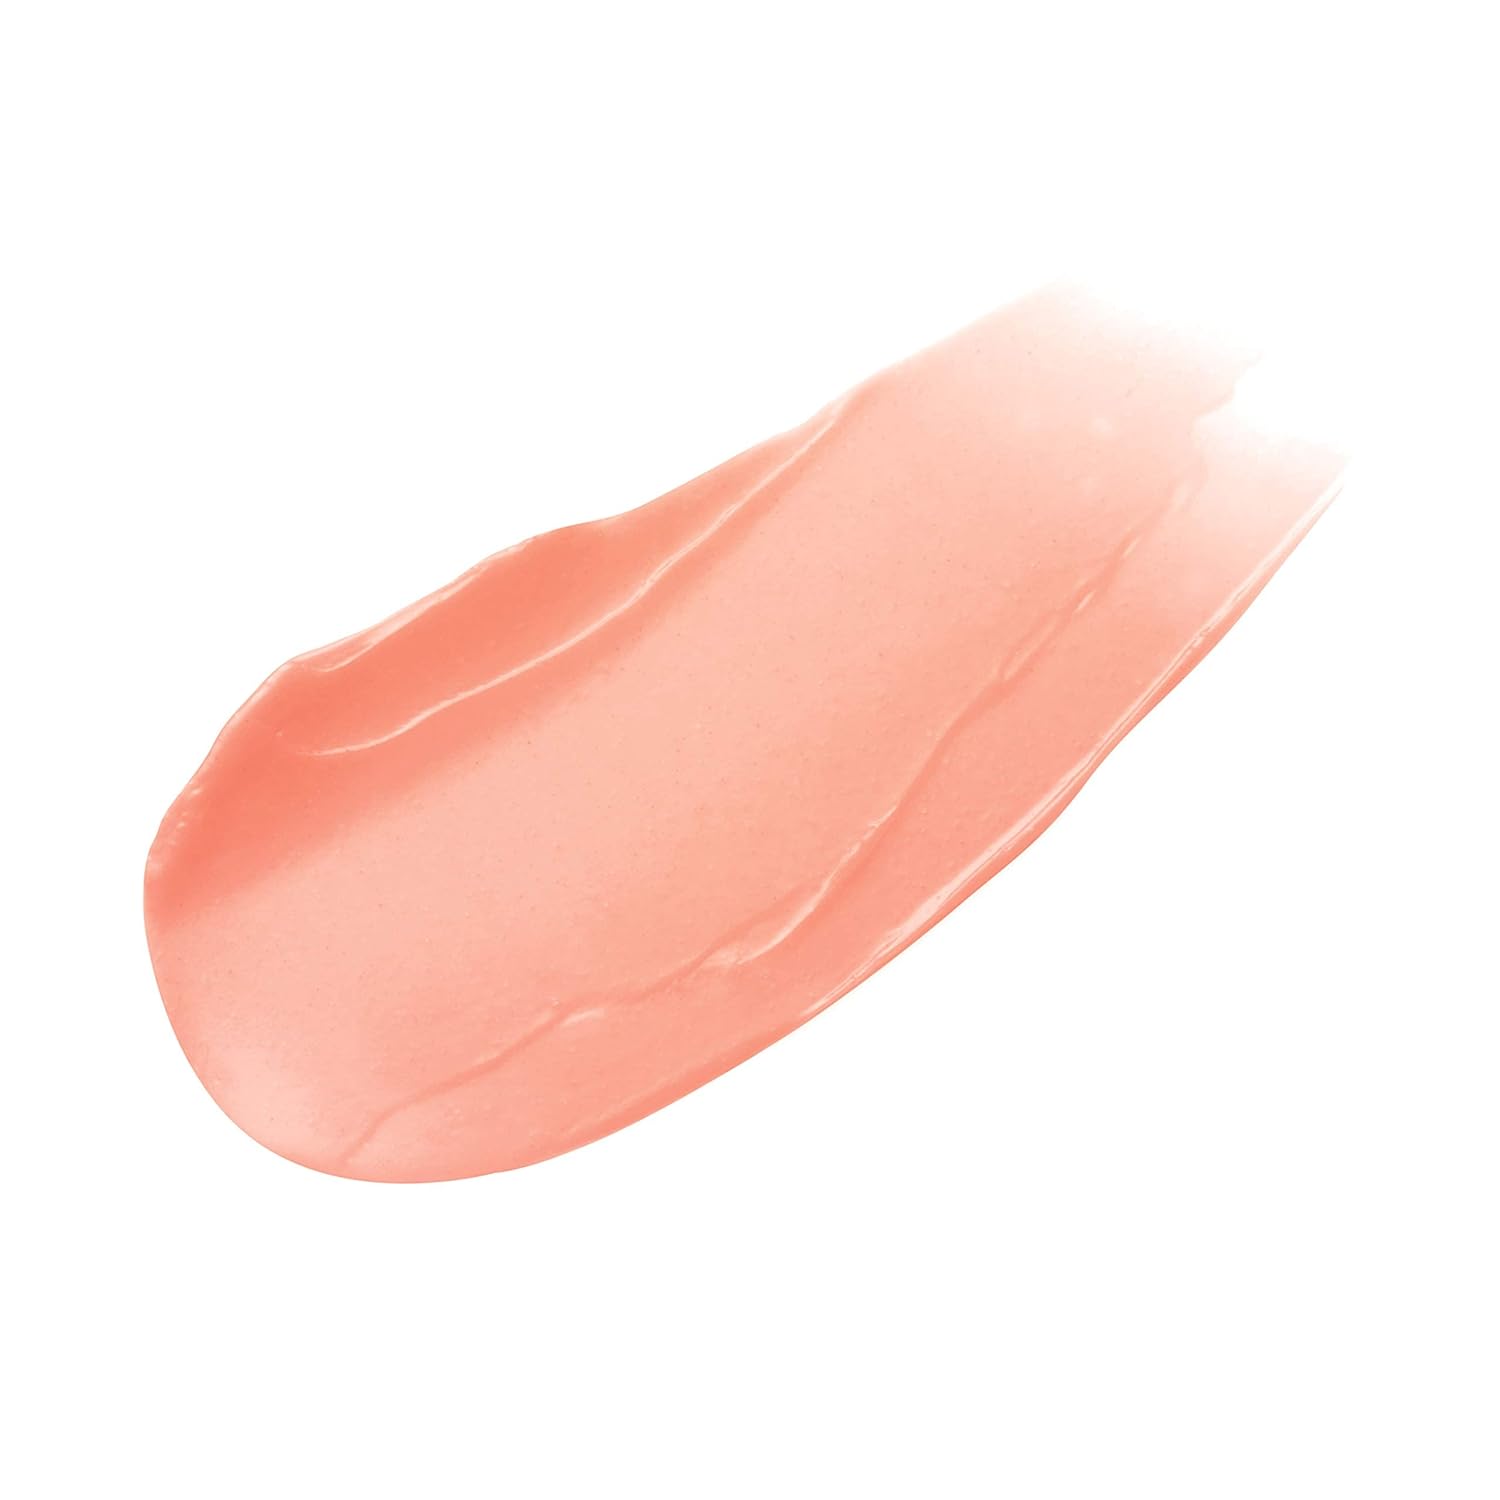 Lip And Cheek Stain, PH-Activated Formula Delivers Long-Lasting Custom Color With Hydrating Botanical Oils, Cruelty-Free